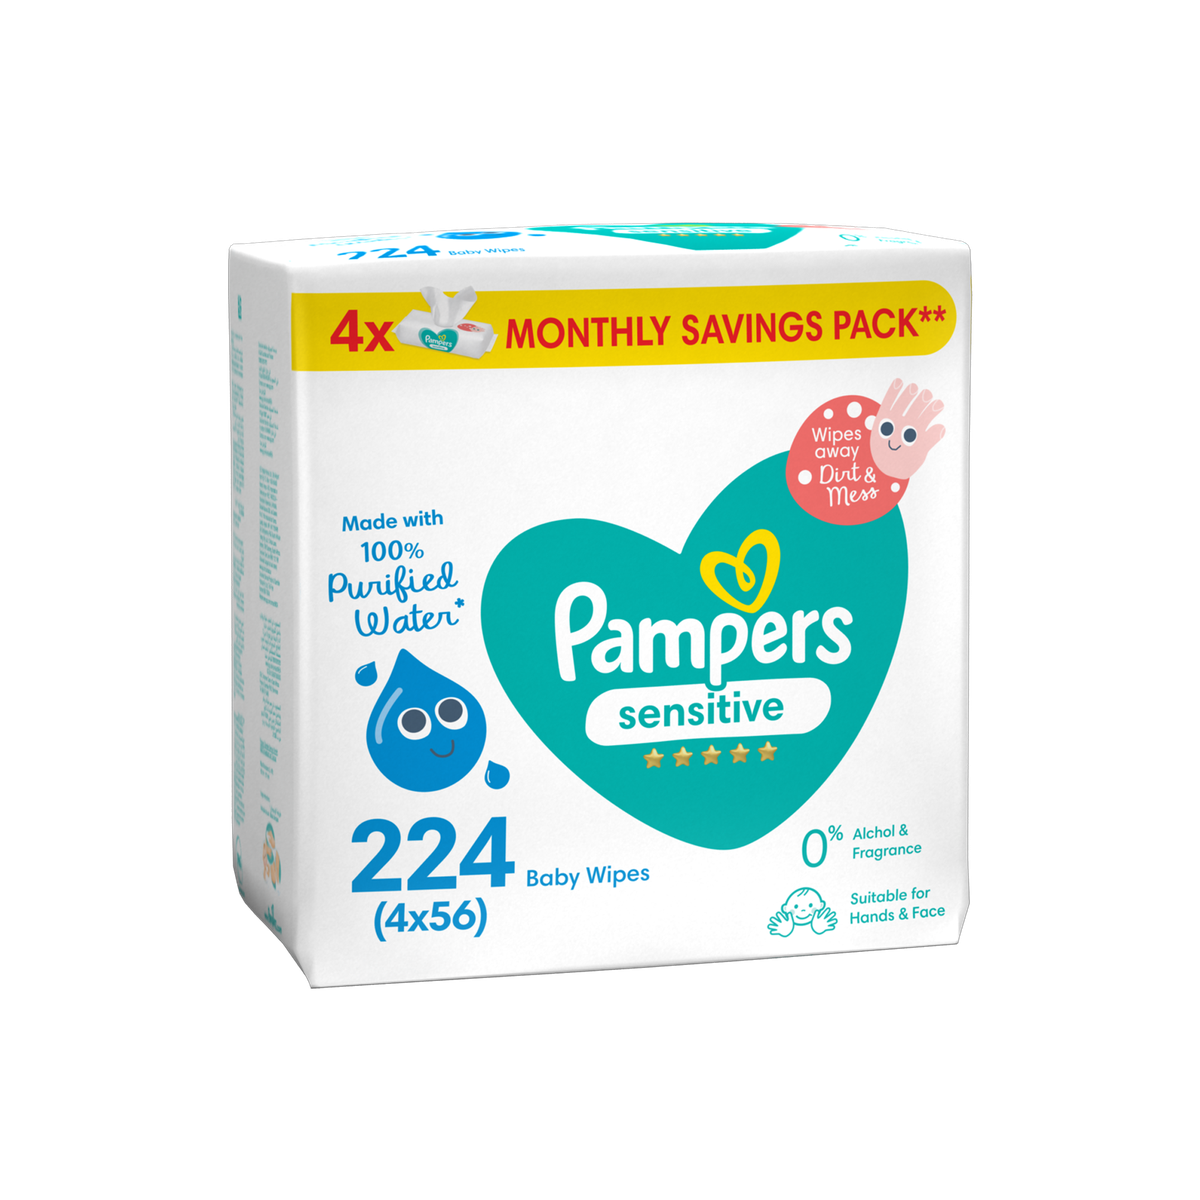 Pampers Sensitive Wipes - 224 (4x56) - 100% Purified Water Wipes